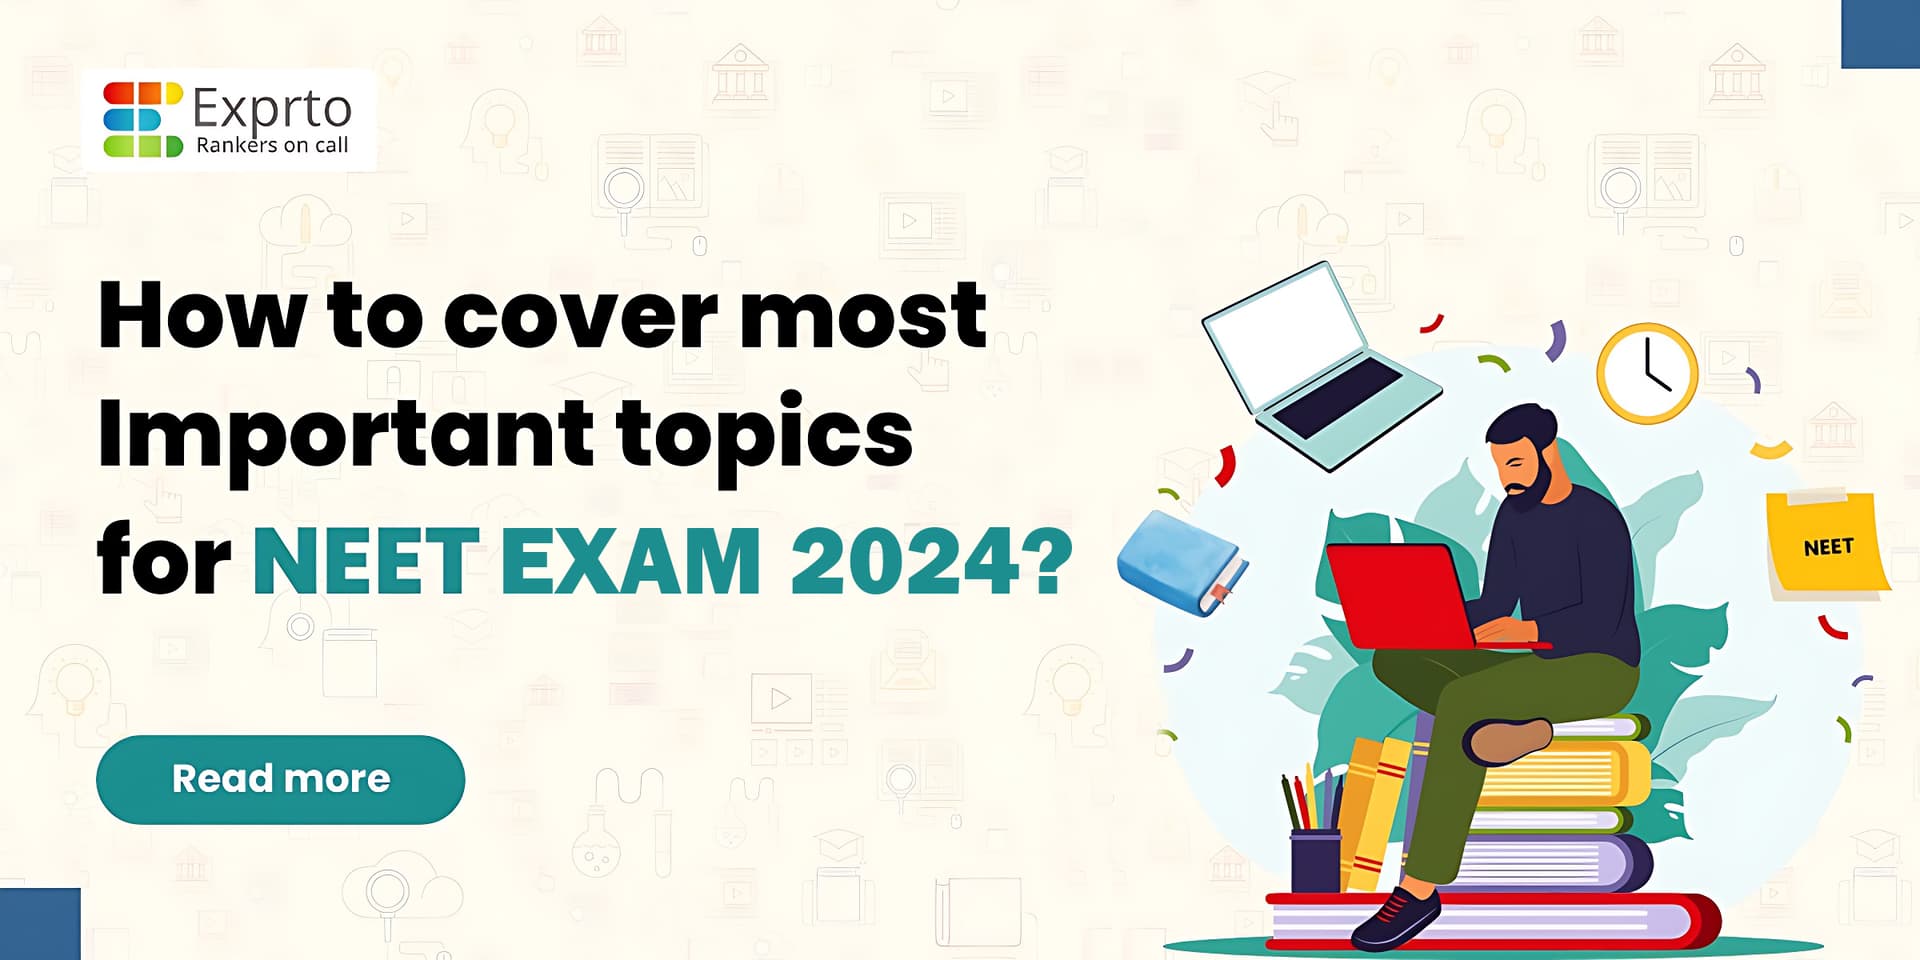 How to cover most important topics for NEET EXAM NEET 2024 Exprto